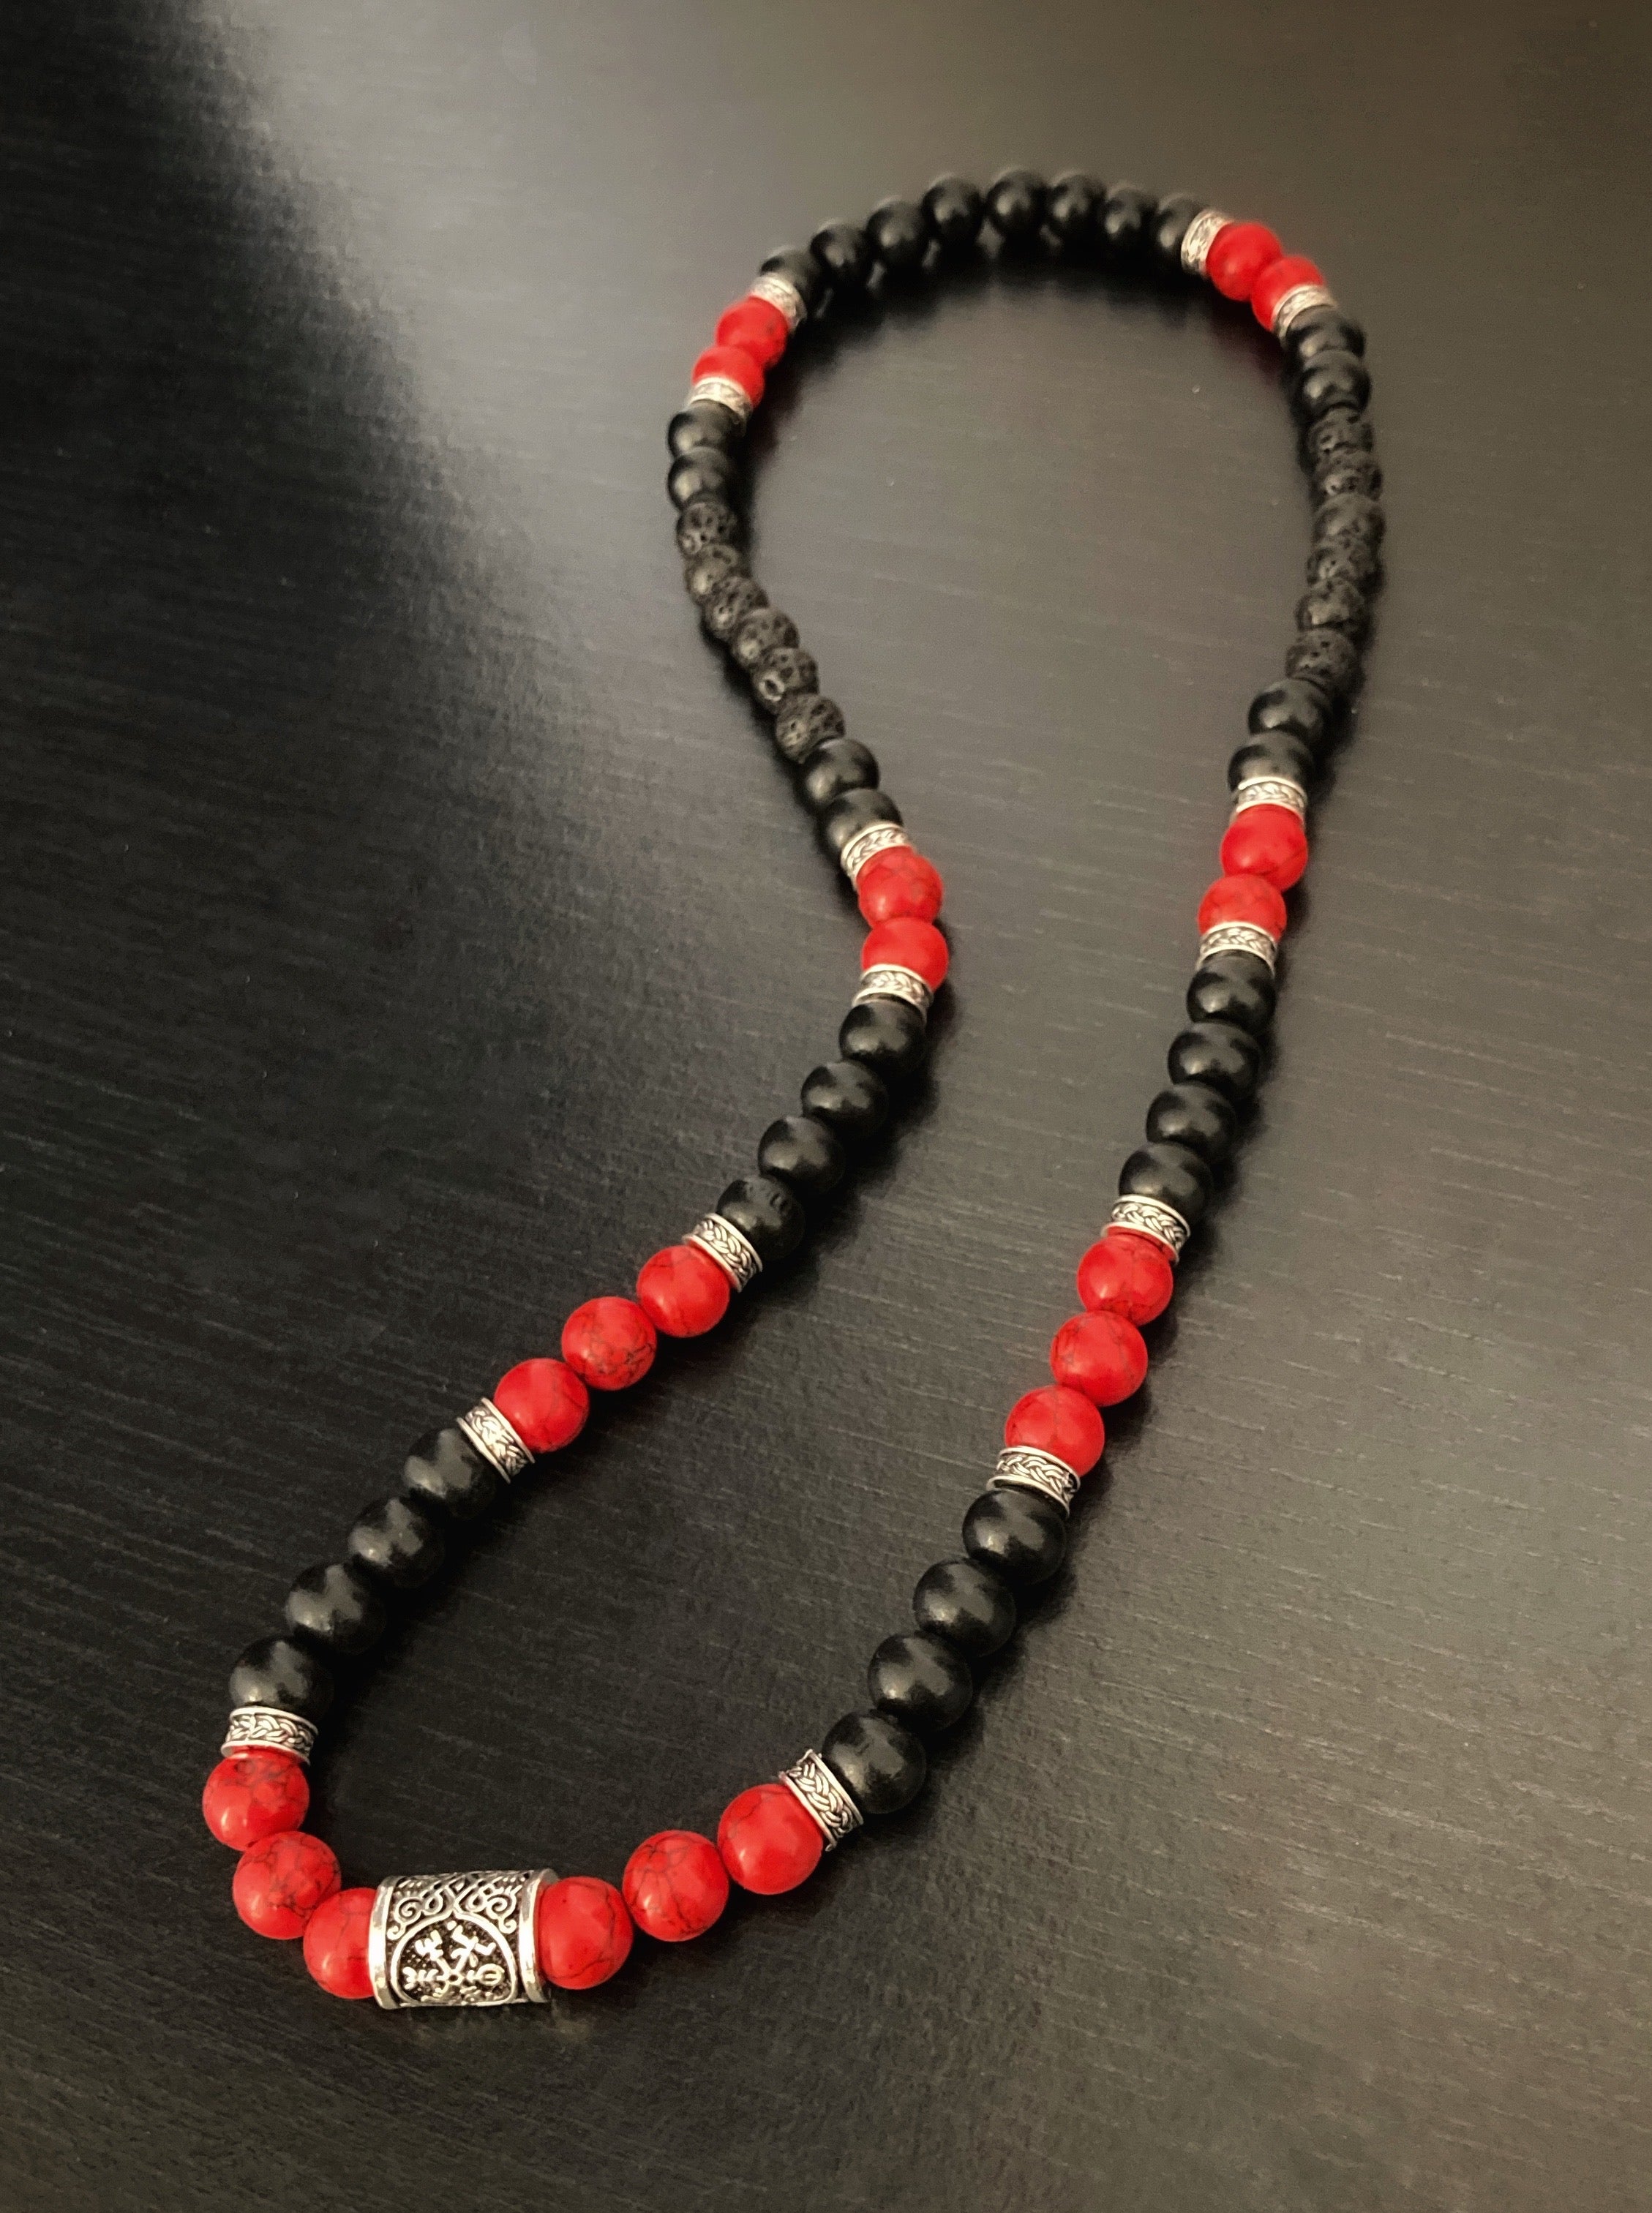 Buy Red and Black Resin bead jewellery set | Adjustable necklace with Fish  hook earrings at Amazon.in